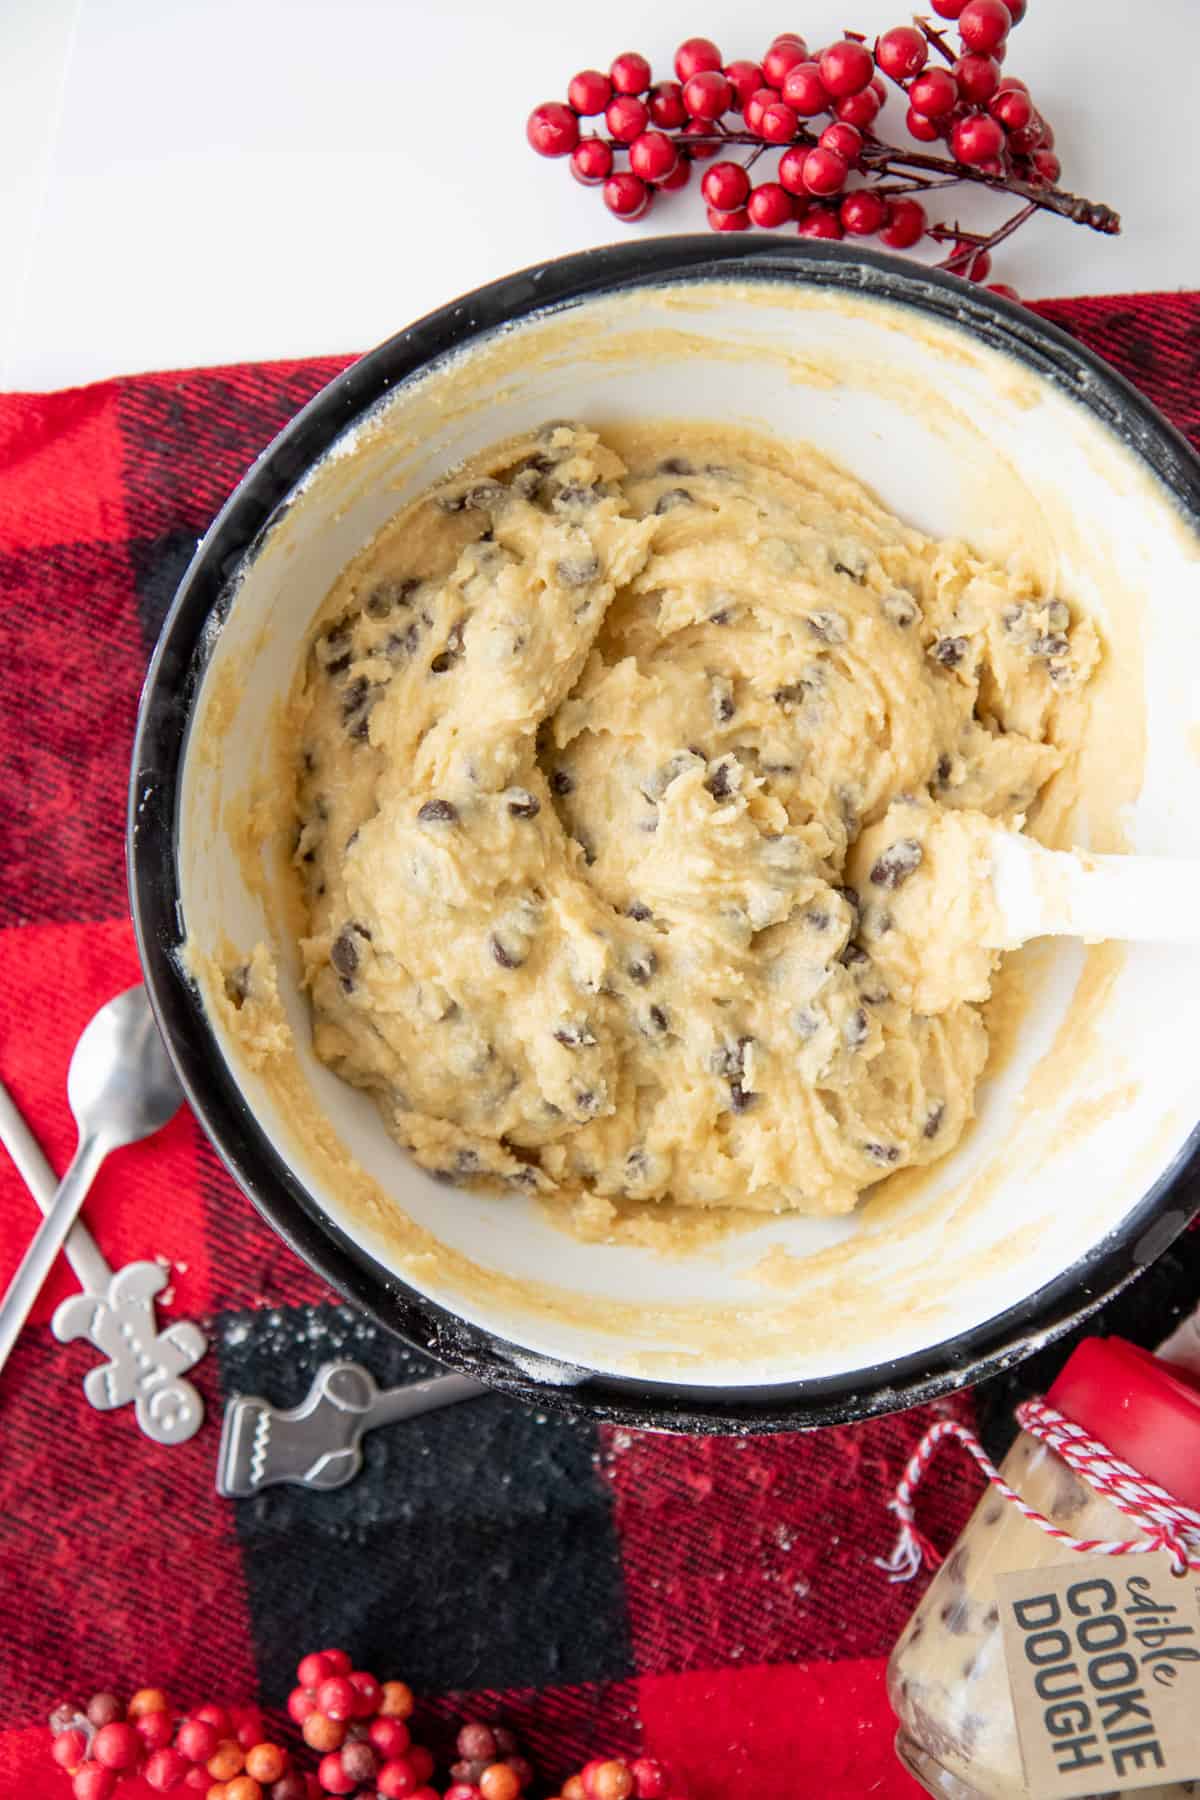 A mixing bowl full of edible chocolate chip cookie dough sits on a red and black plaid placemat.